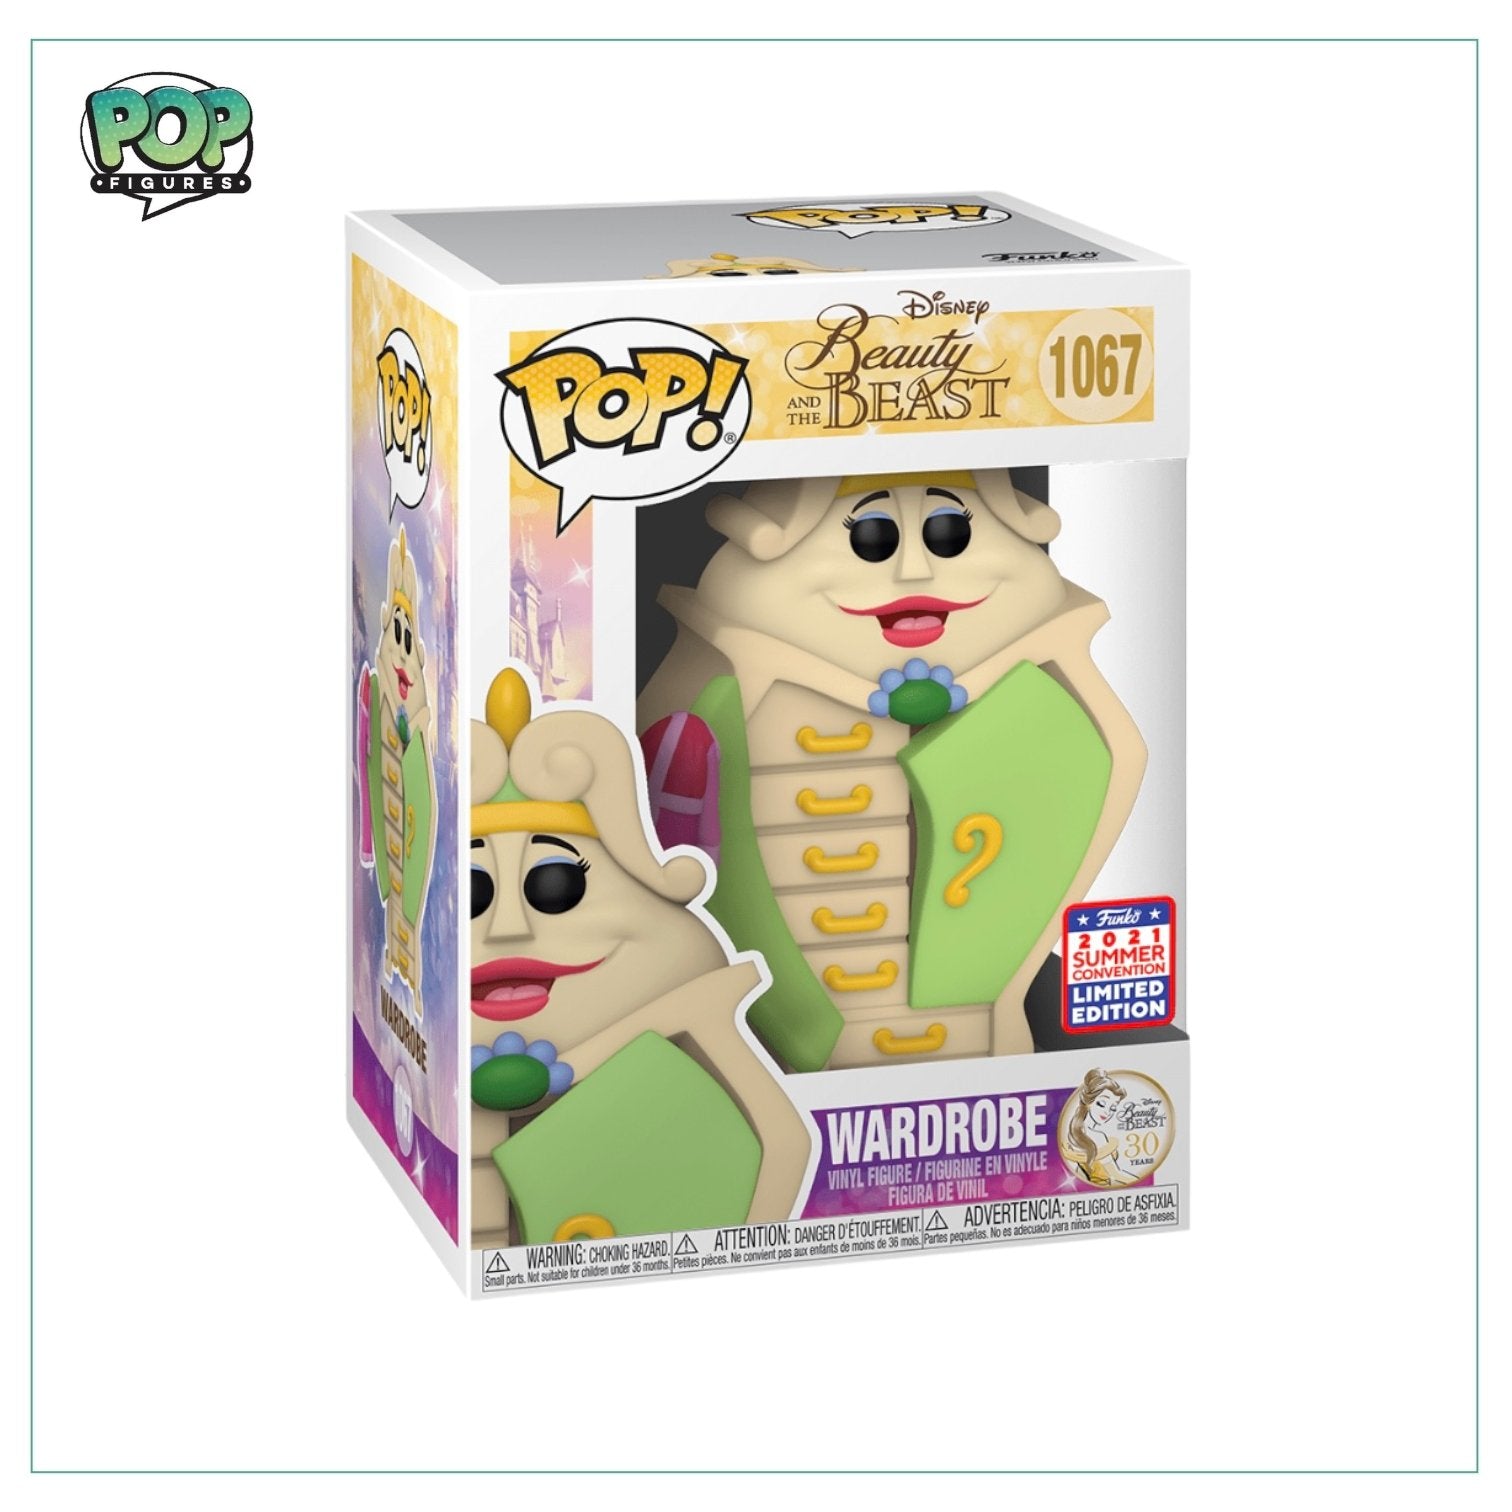 Wardrobe #1067 Funko Pop! Disney Beauty and the Beast - Virtual Funkon 2021 Shared Exclusive - Angry Cat